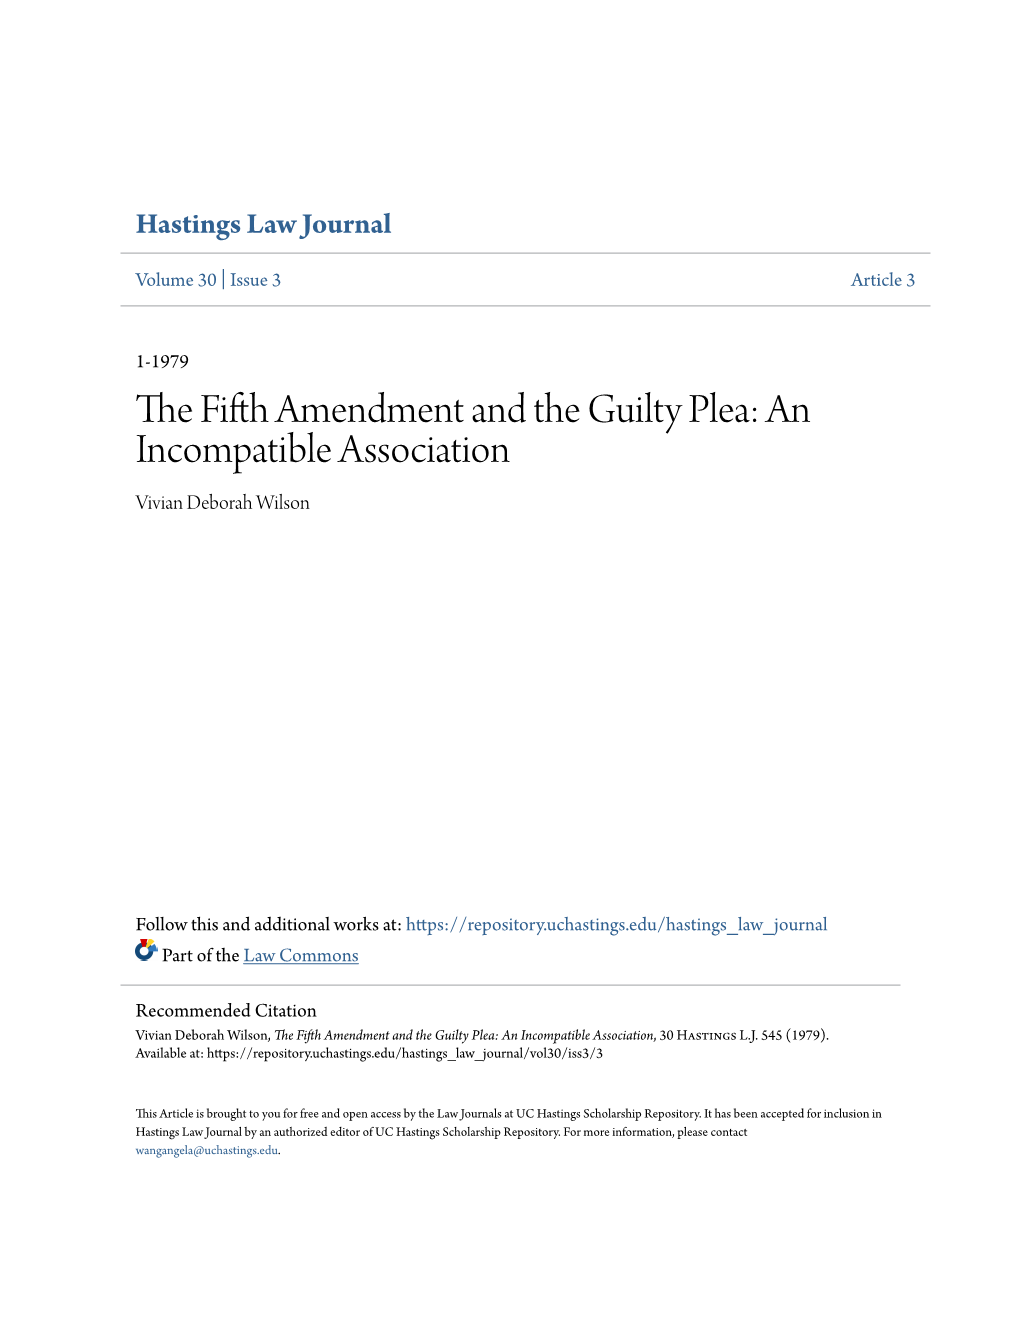 The Fifth Amendment and the Guilty Plea: an Incompatible Association, 30 Hastings L.J